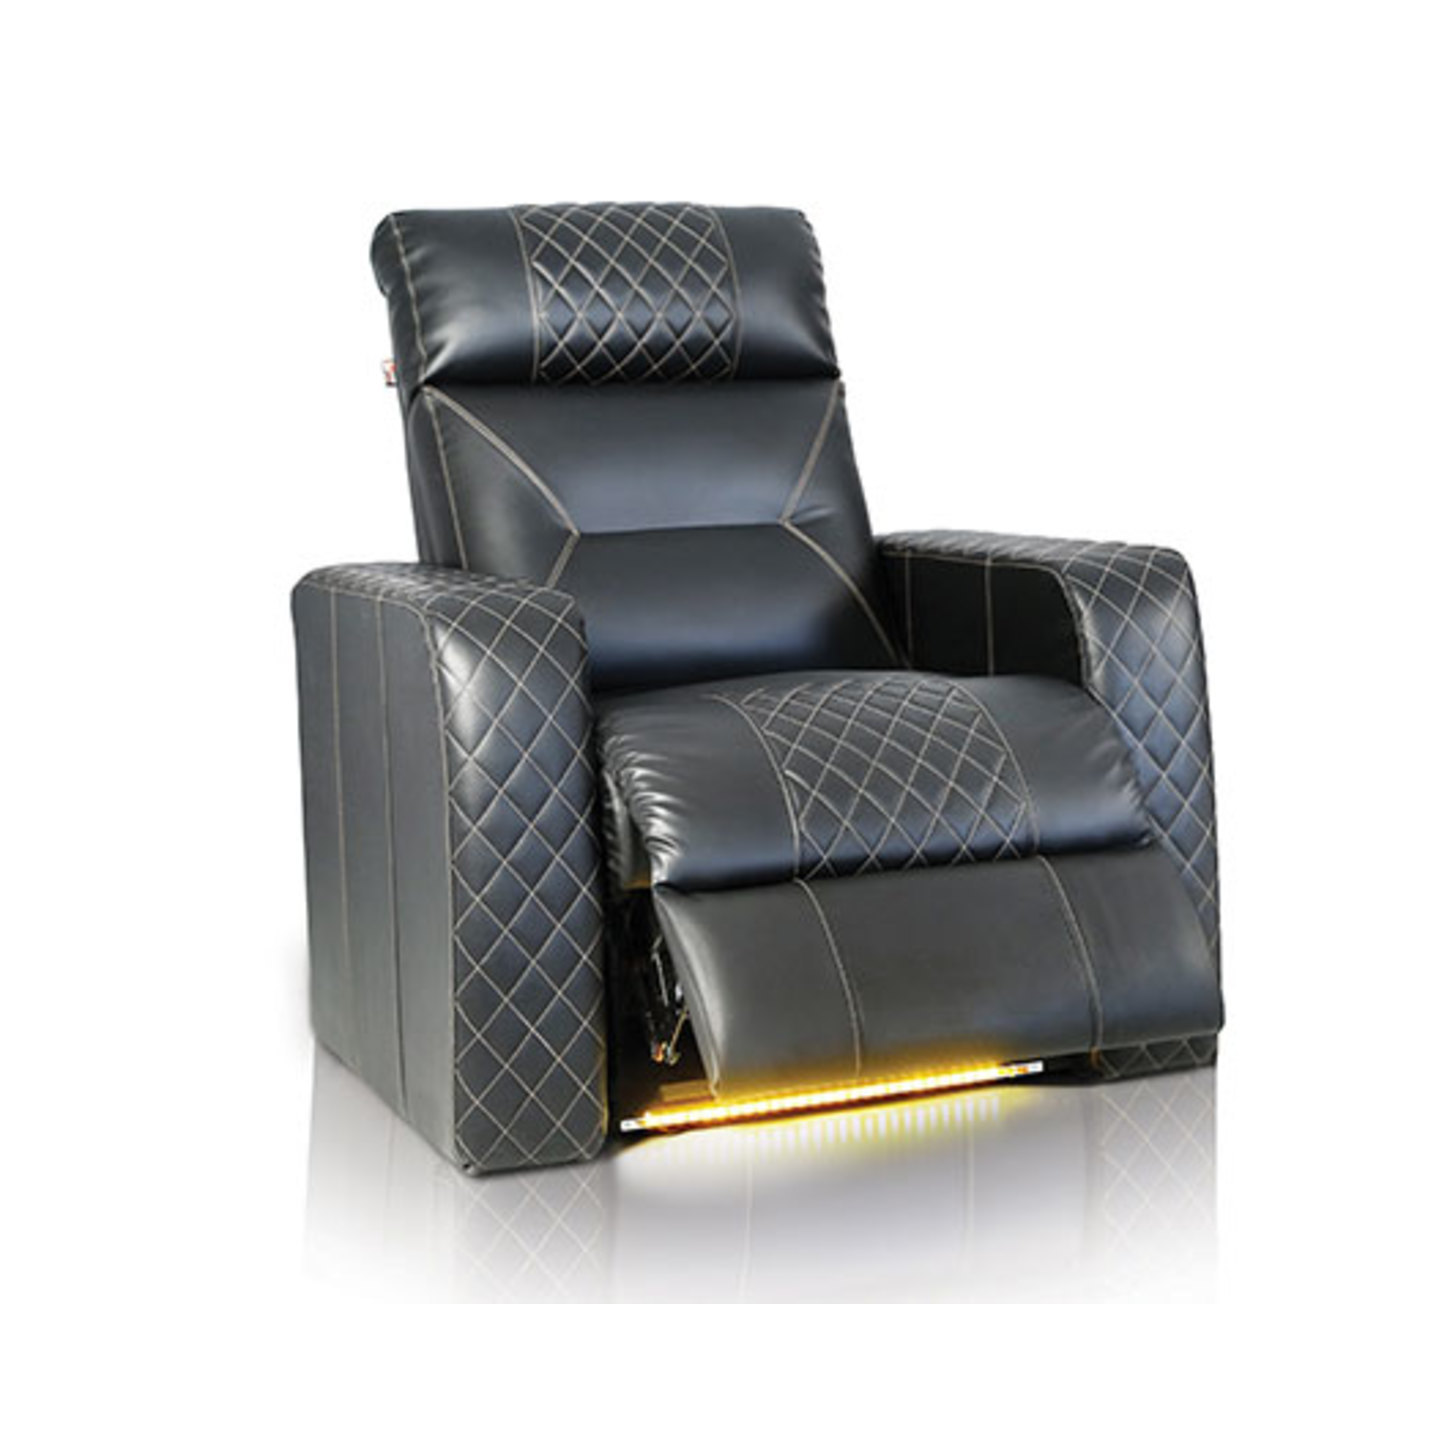 LN Recliner Chair Grande Manual System In Black Colour